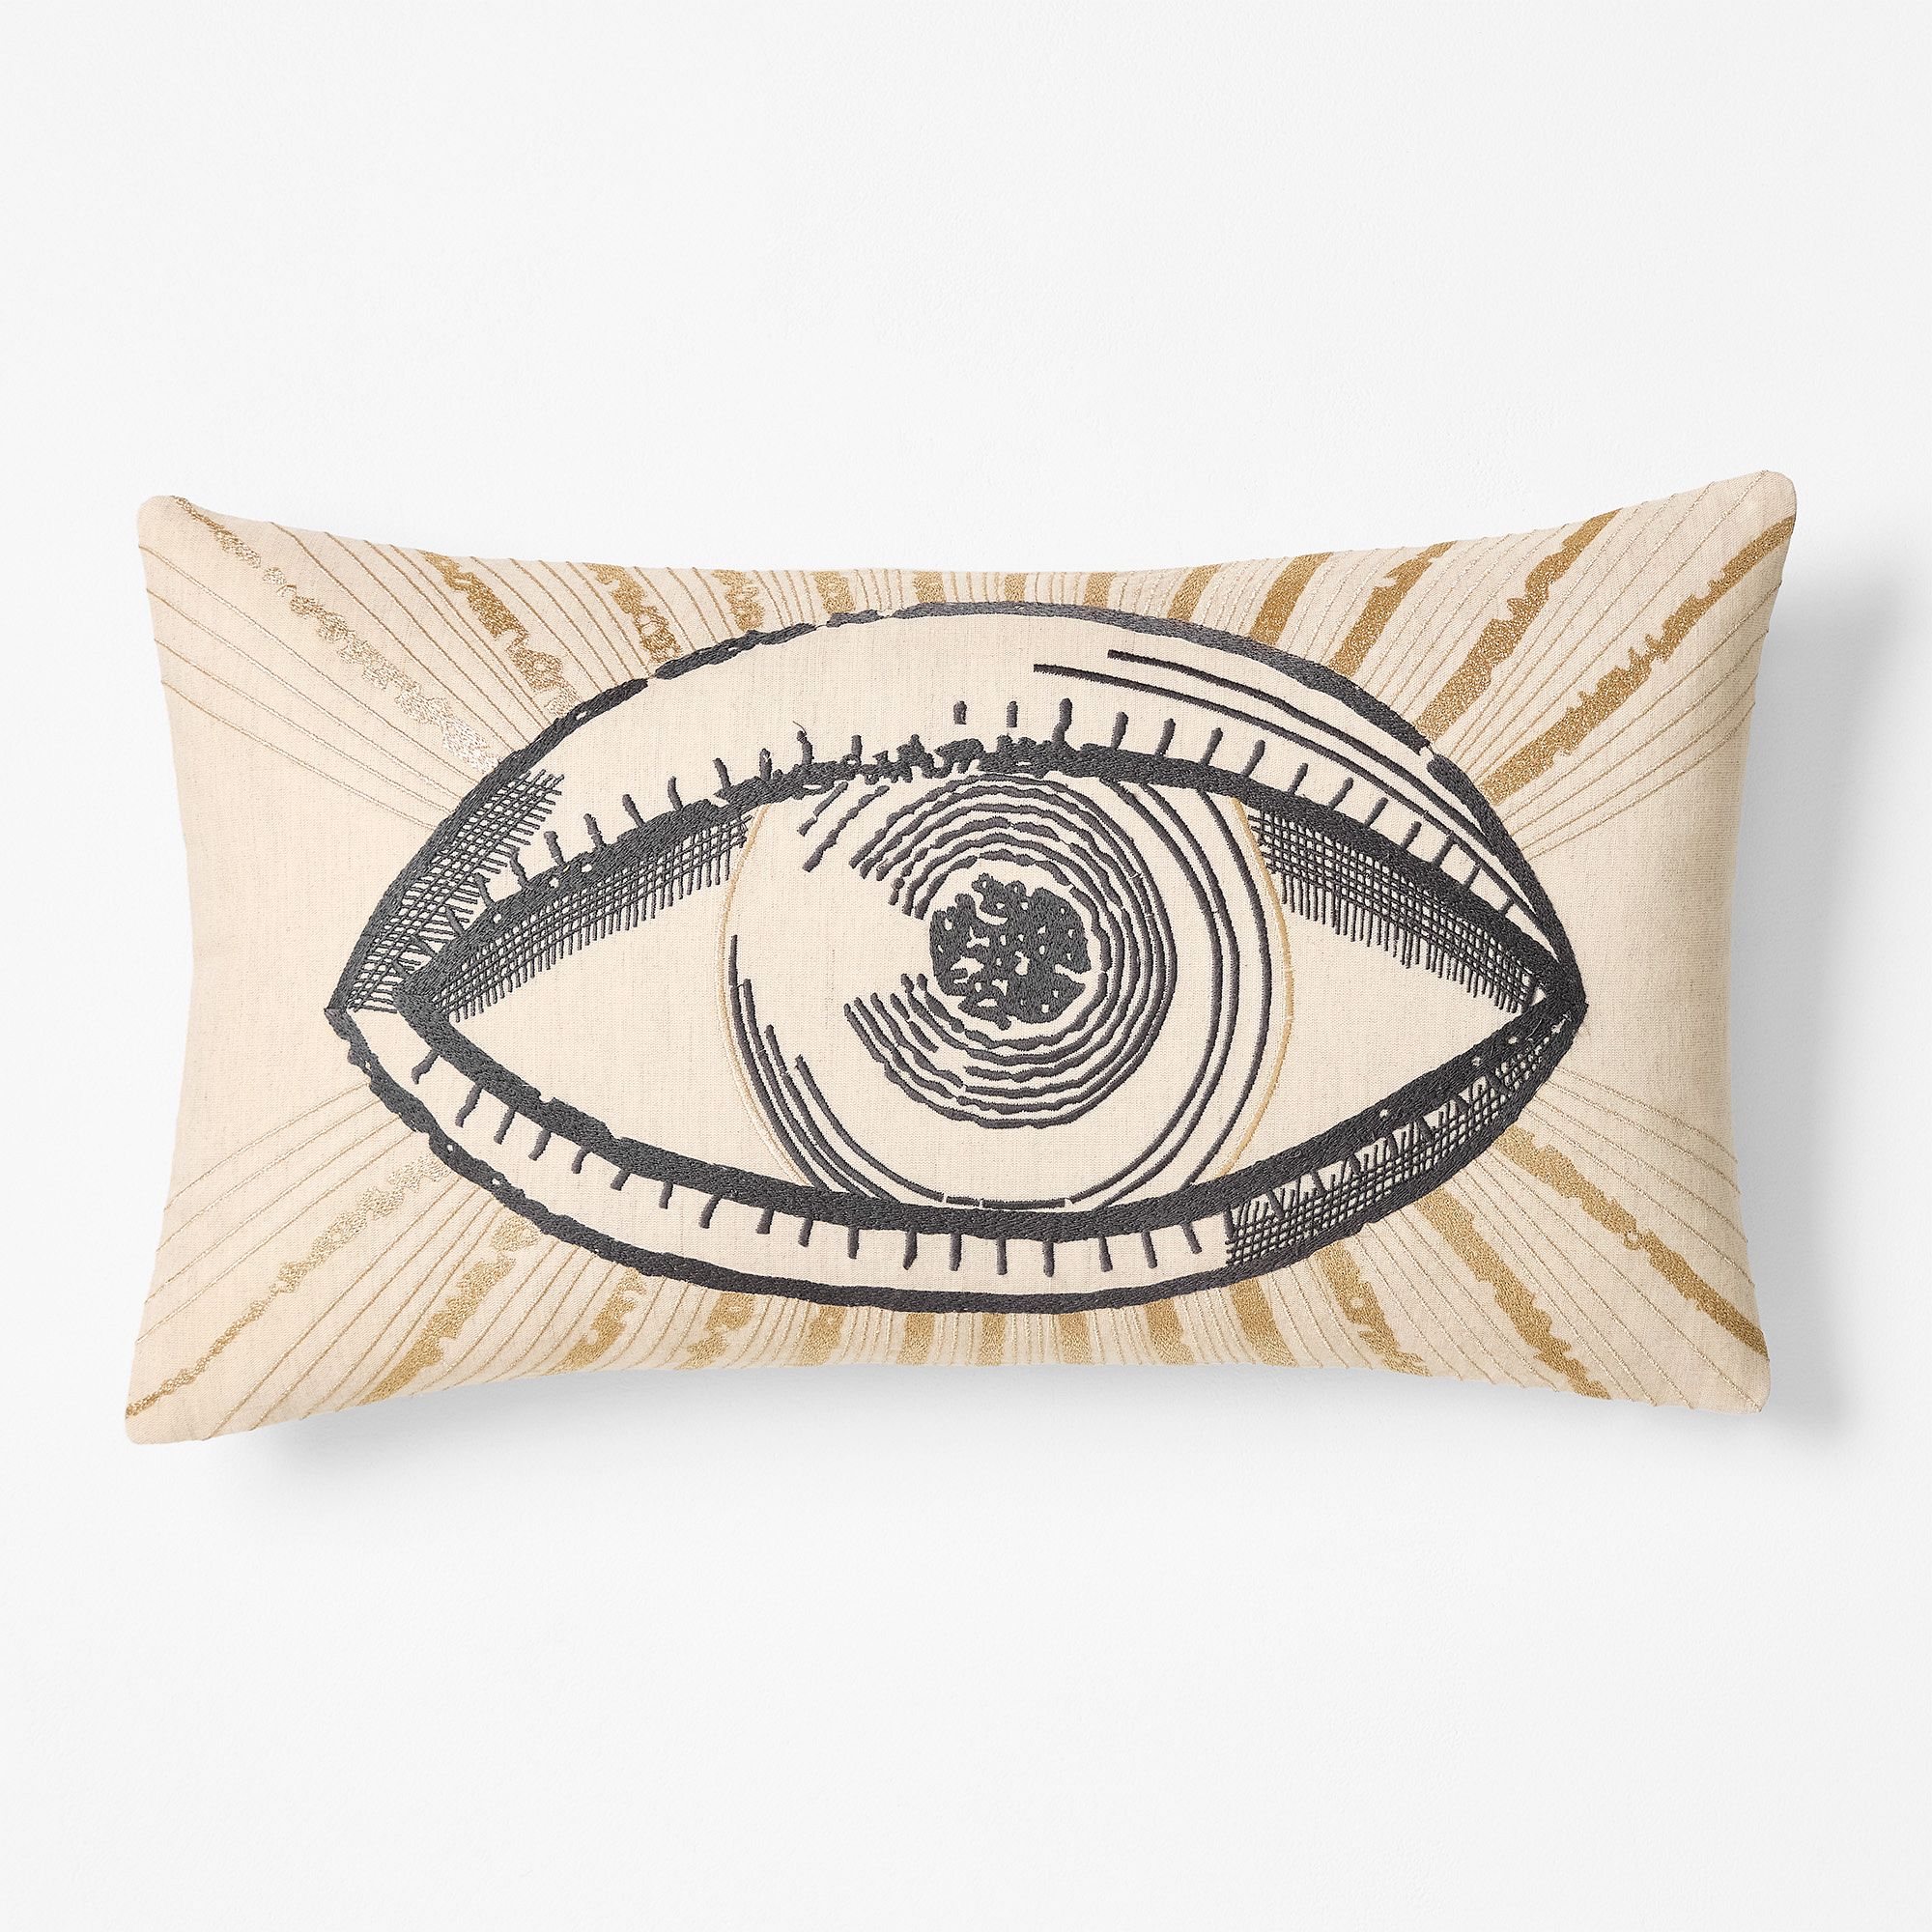 Embroidered Eye Pillow Cover | West Elm